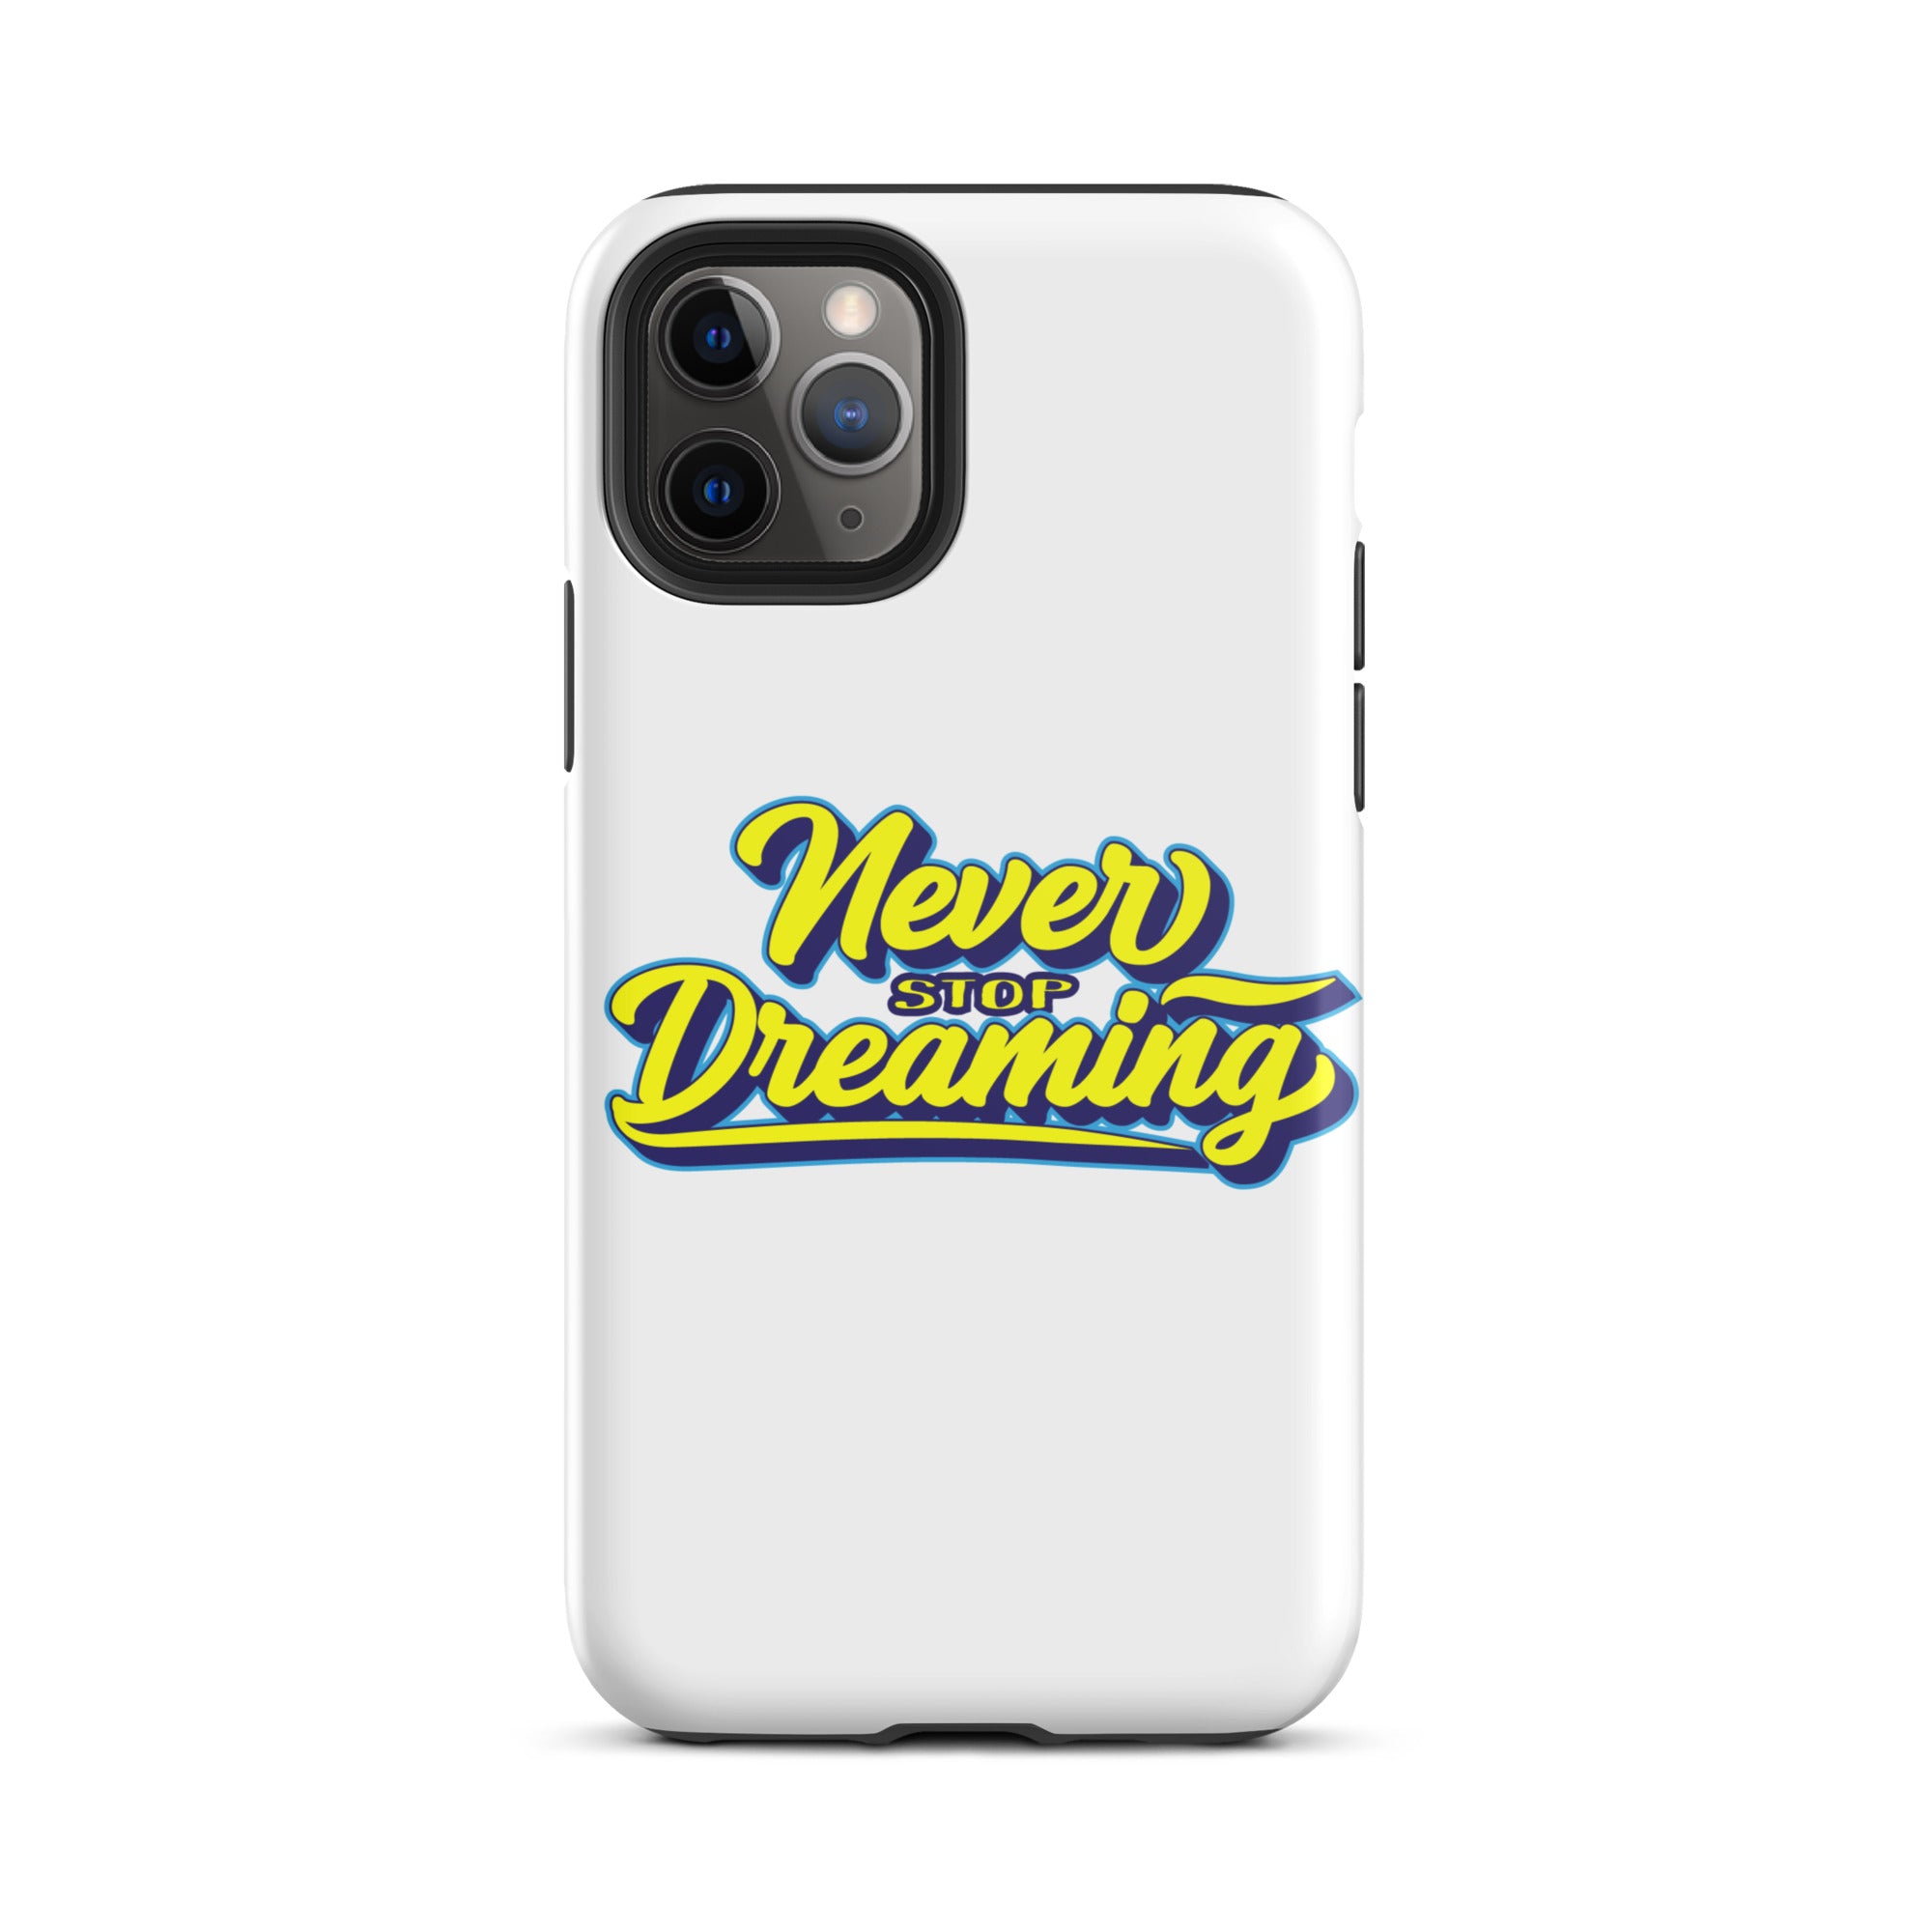 Never Stop Dreaming - Tough iPhone case